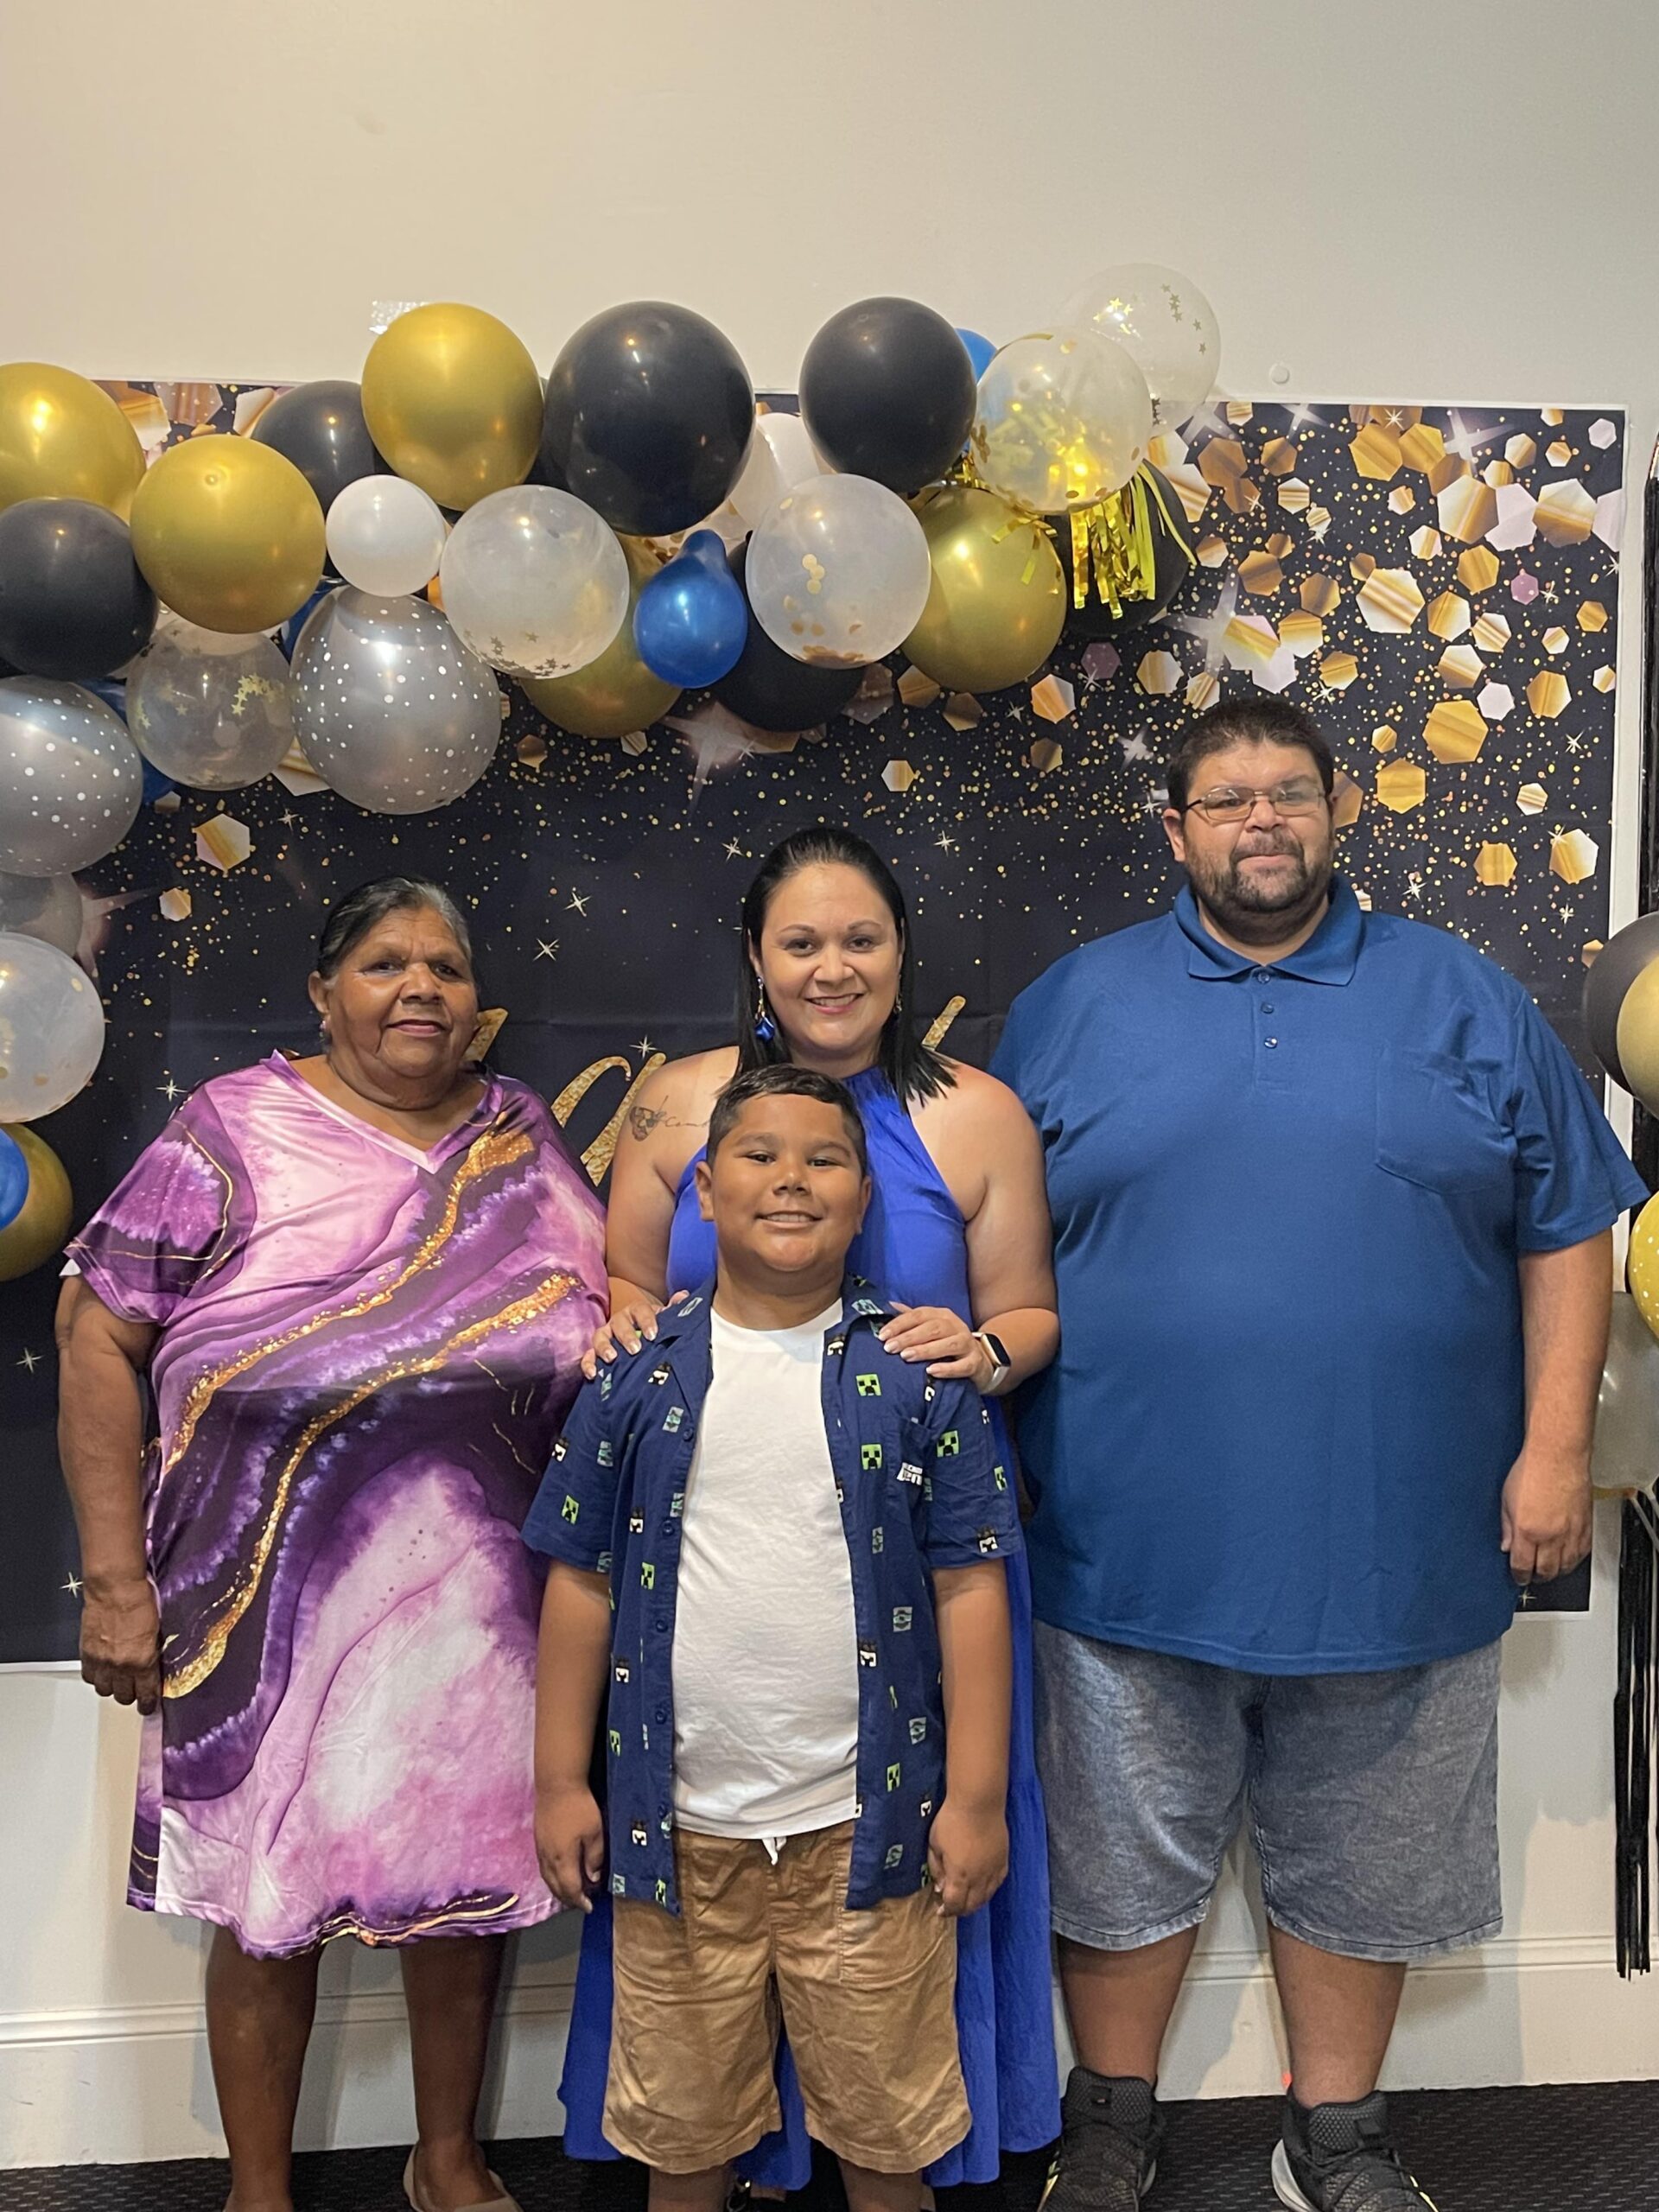 Michelle Combo, centre, with her mum Colleen, brother Luke and son Siaosi Manu (George) at Michelle’s birthday celebrations in Wee Waa.